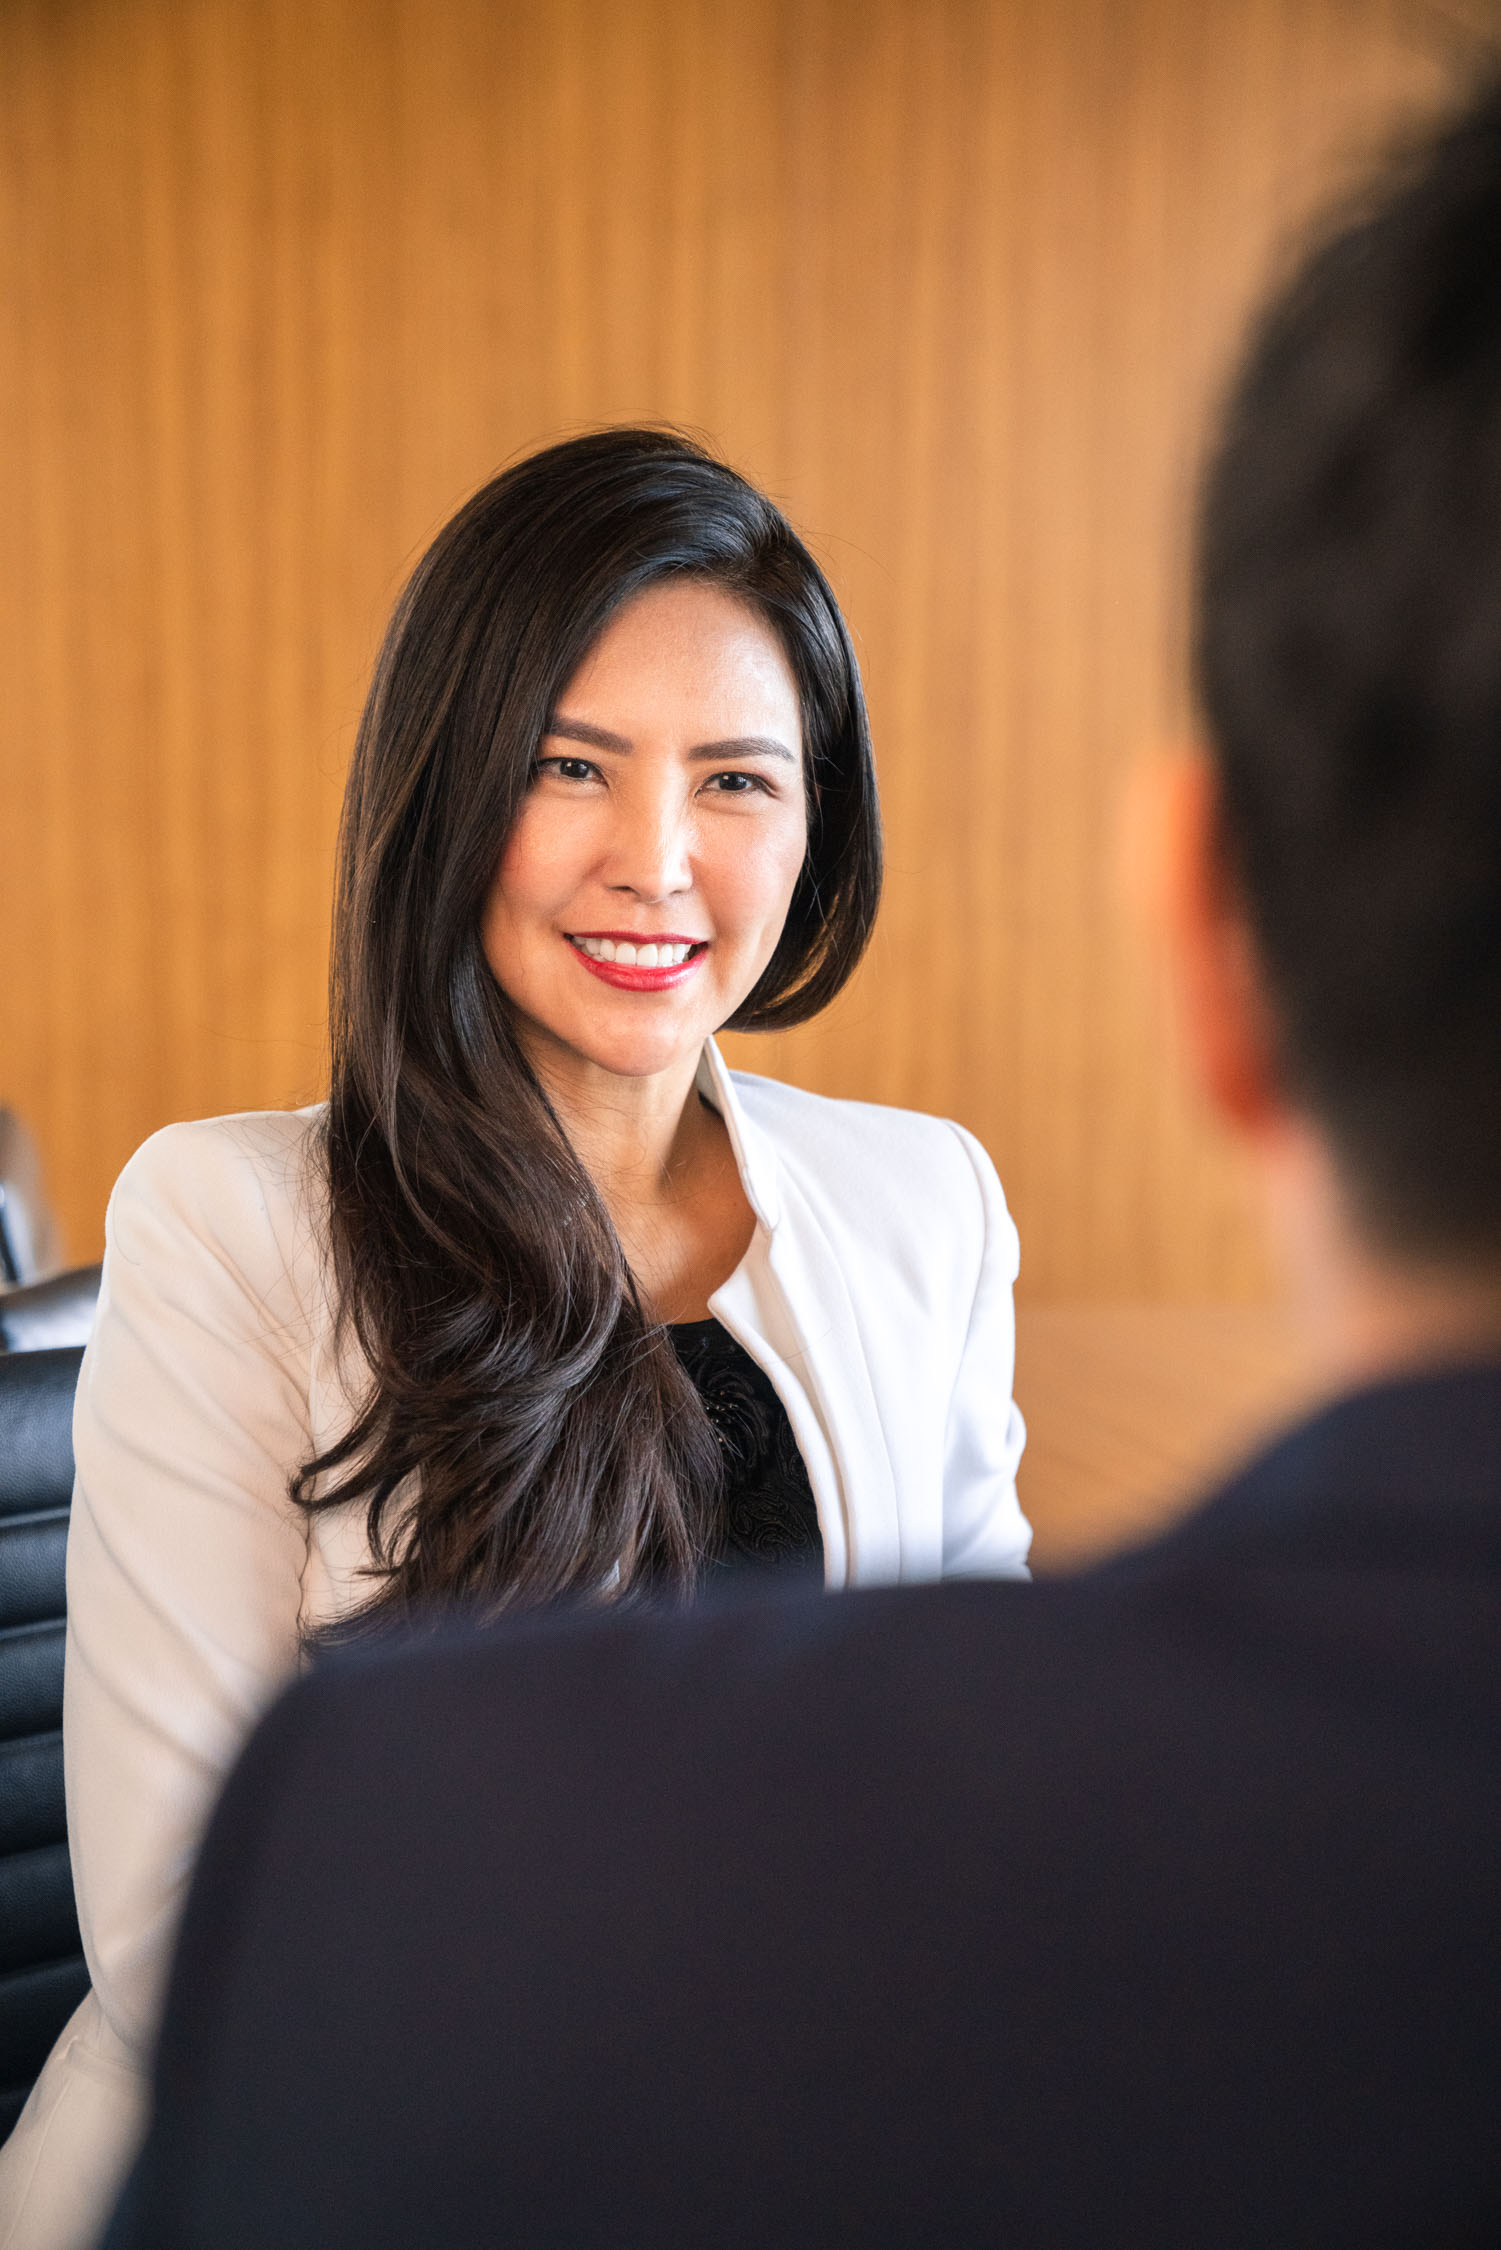 An Asian woman with long hair in a white blazer and black blouse smiling at client